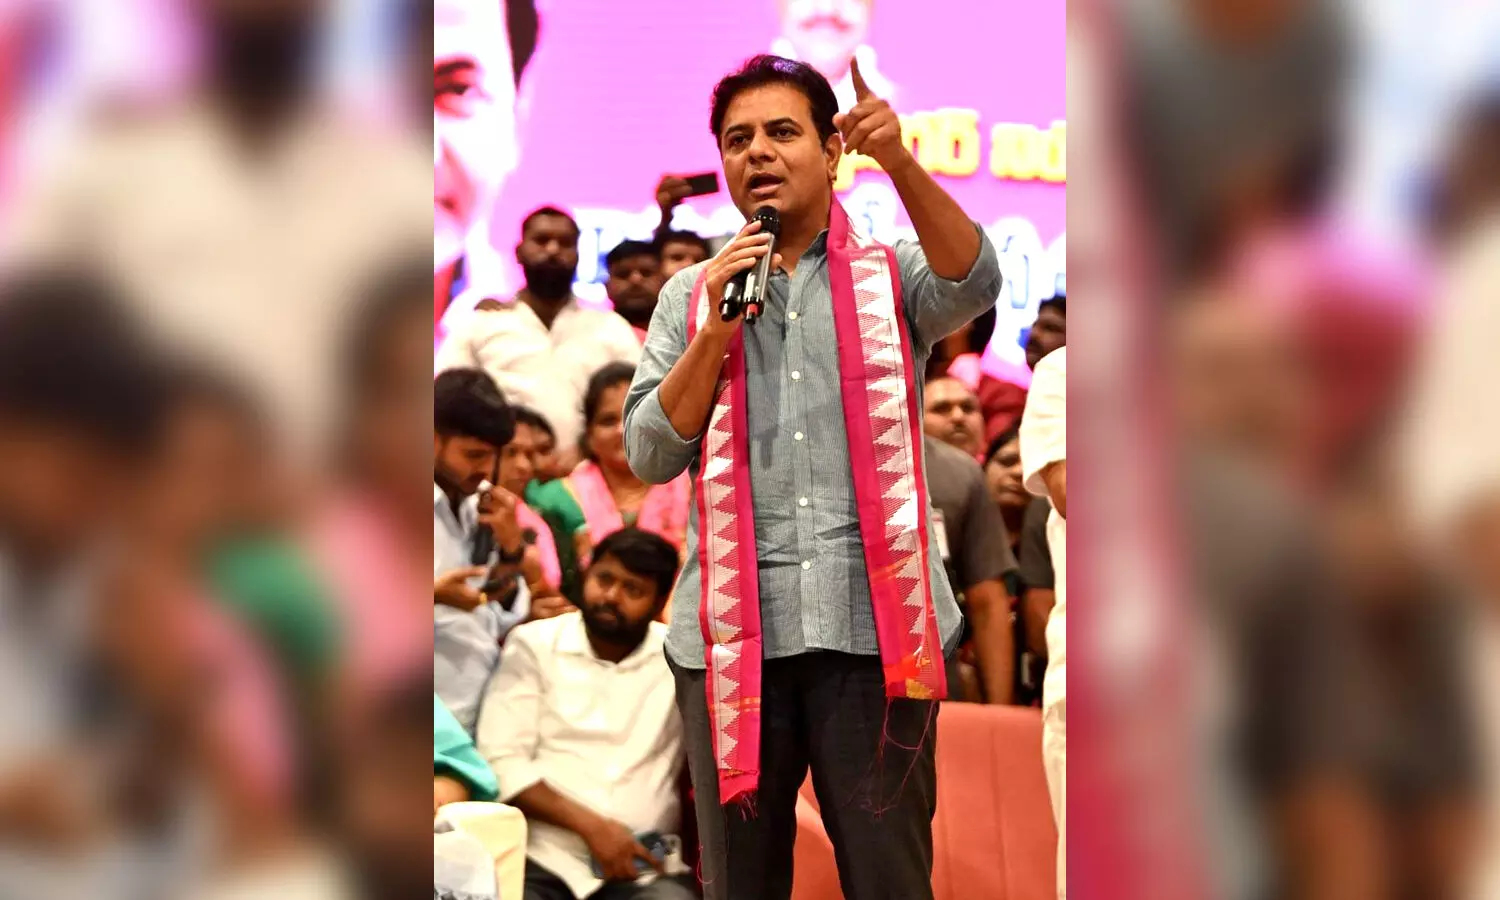 Hyderabad metro services to be extended from Nagole to LB Nagar, Pedda Amberpet, Shamshabad: KTR